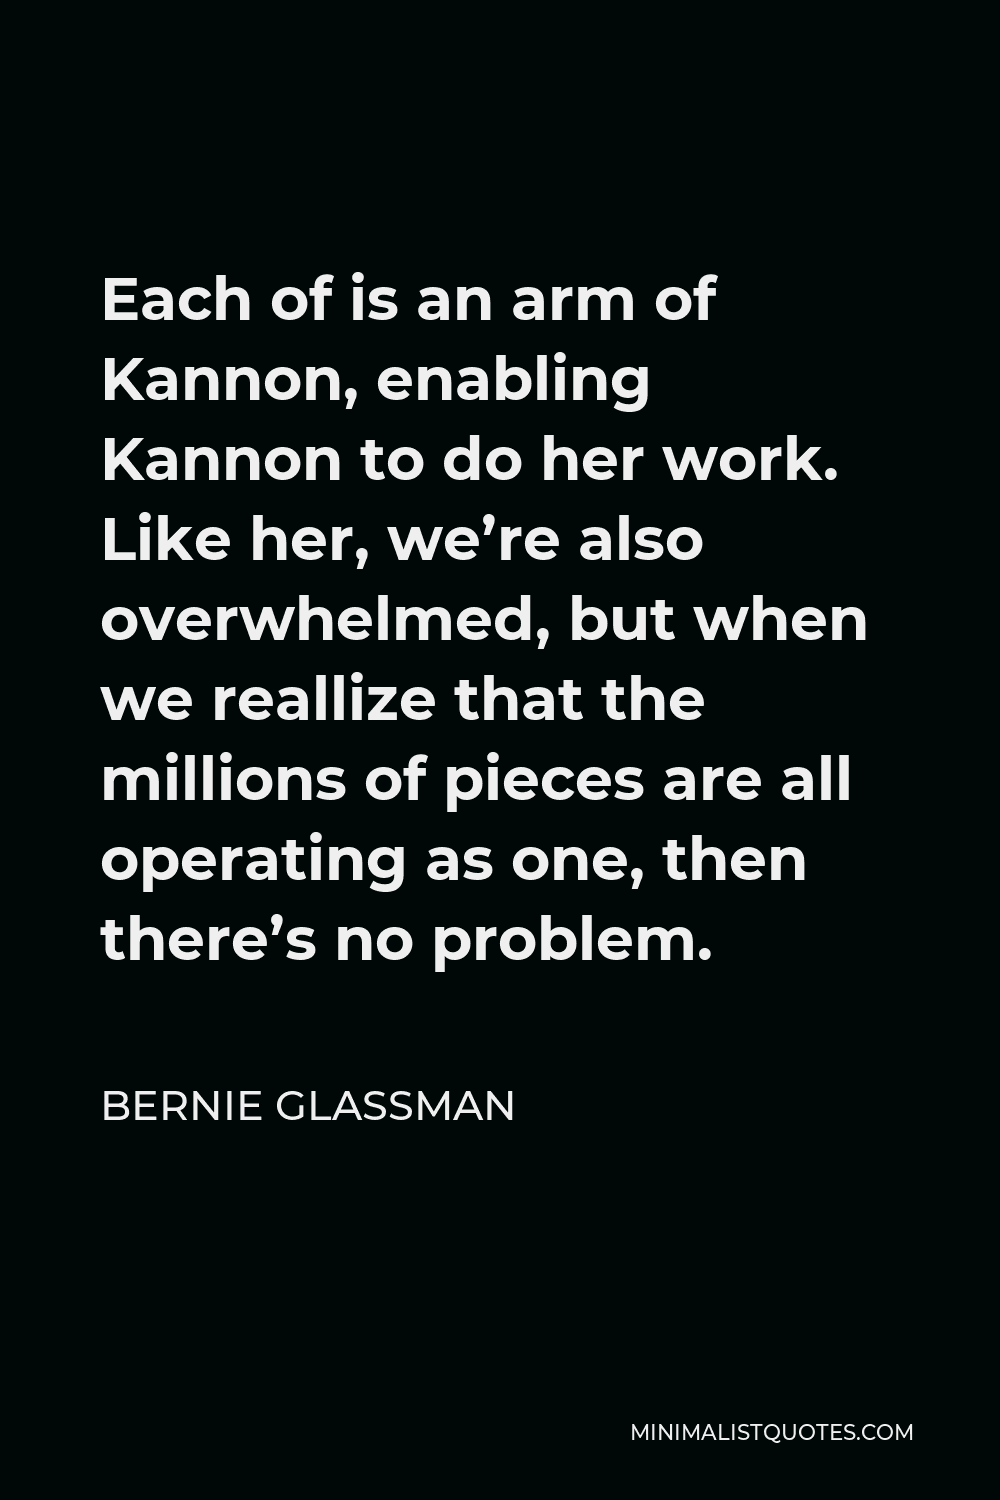 Bernie Glassman Quote - Each of is an arm of Kannon, enabling Kannon to do her work. Like her, we’re also overwhelmed, but when we reallize that the millions of pieces are all operating as one, then there’s no problem.